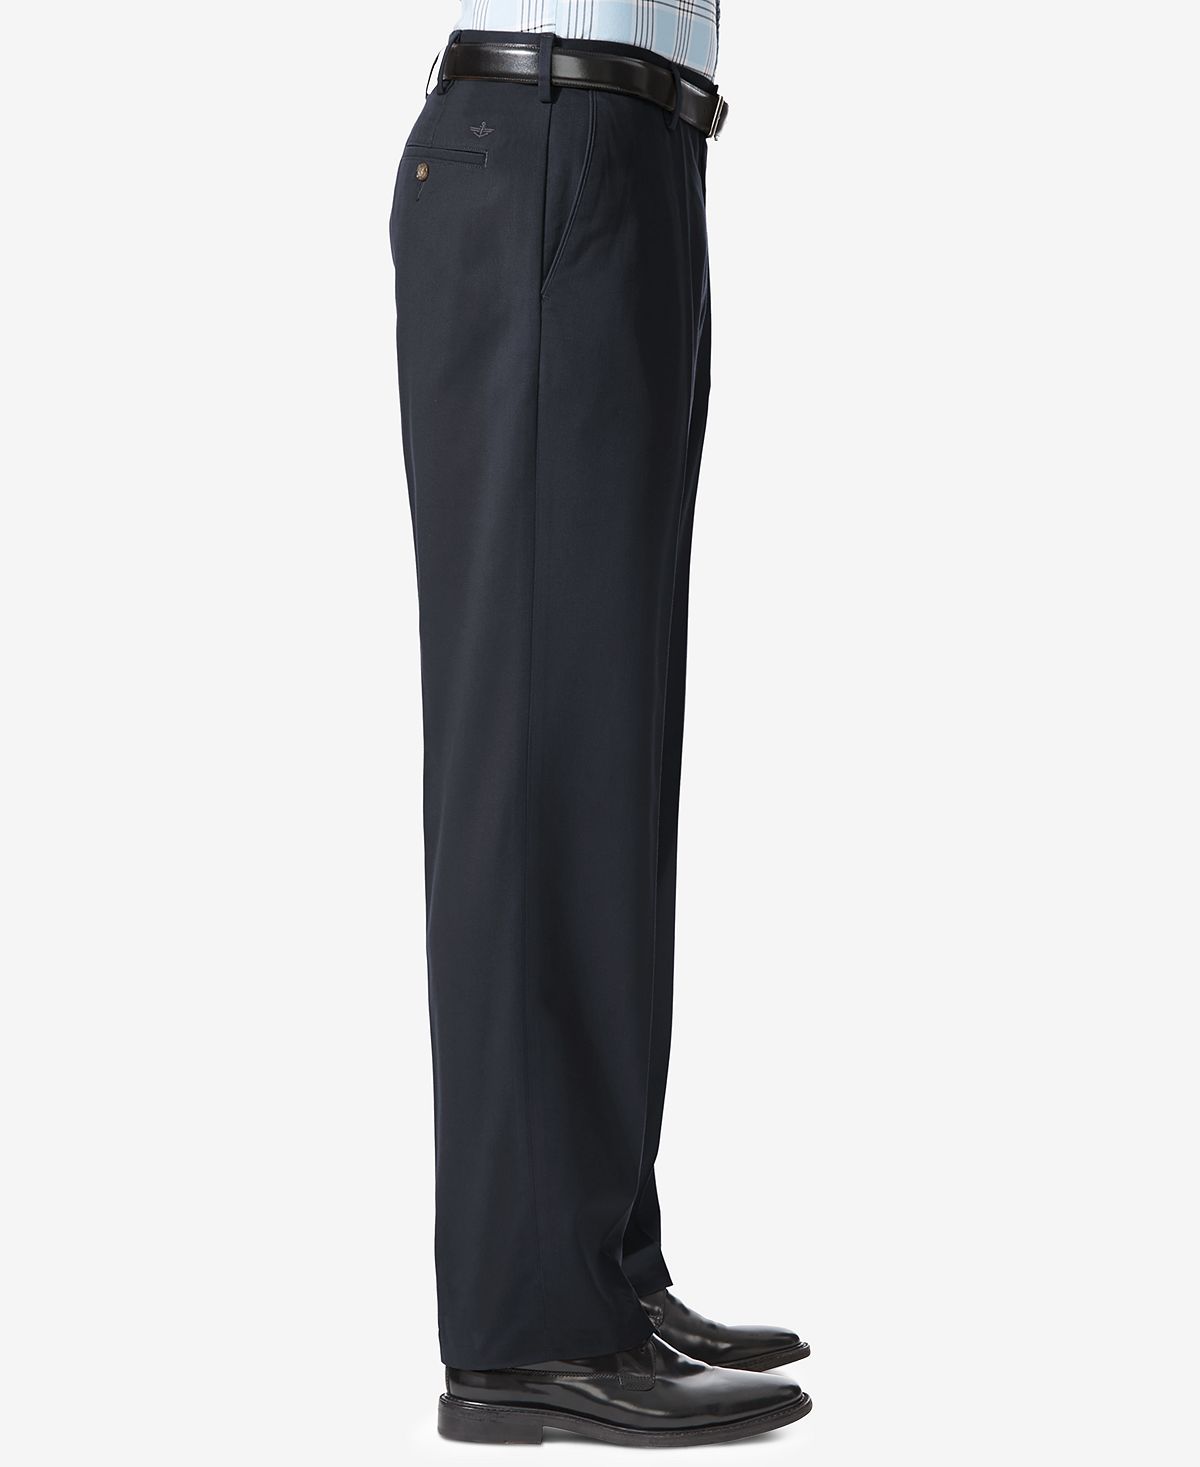 Dockers Comfort Relaxed Fit Khaki Stretch Pants Navy